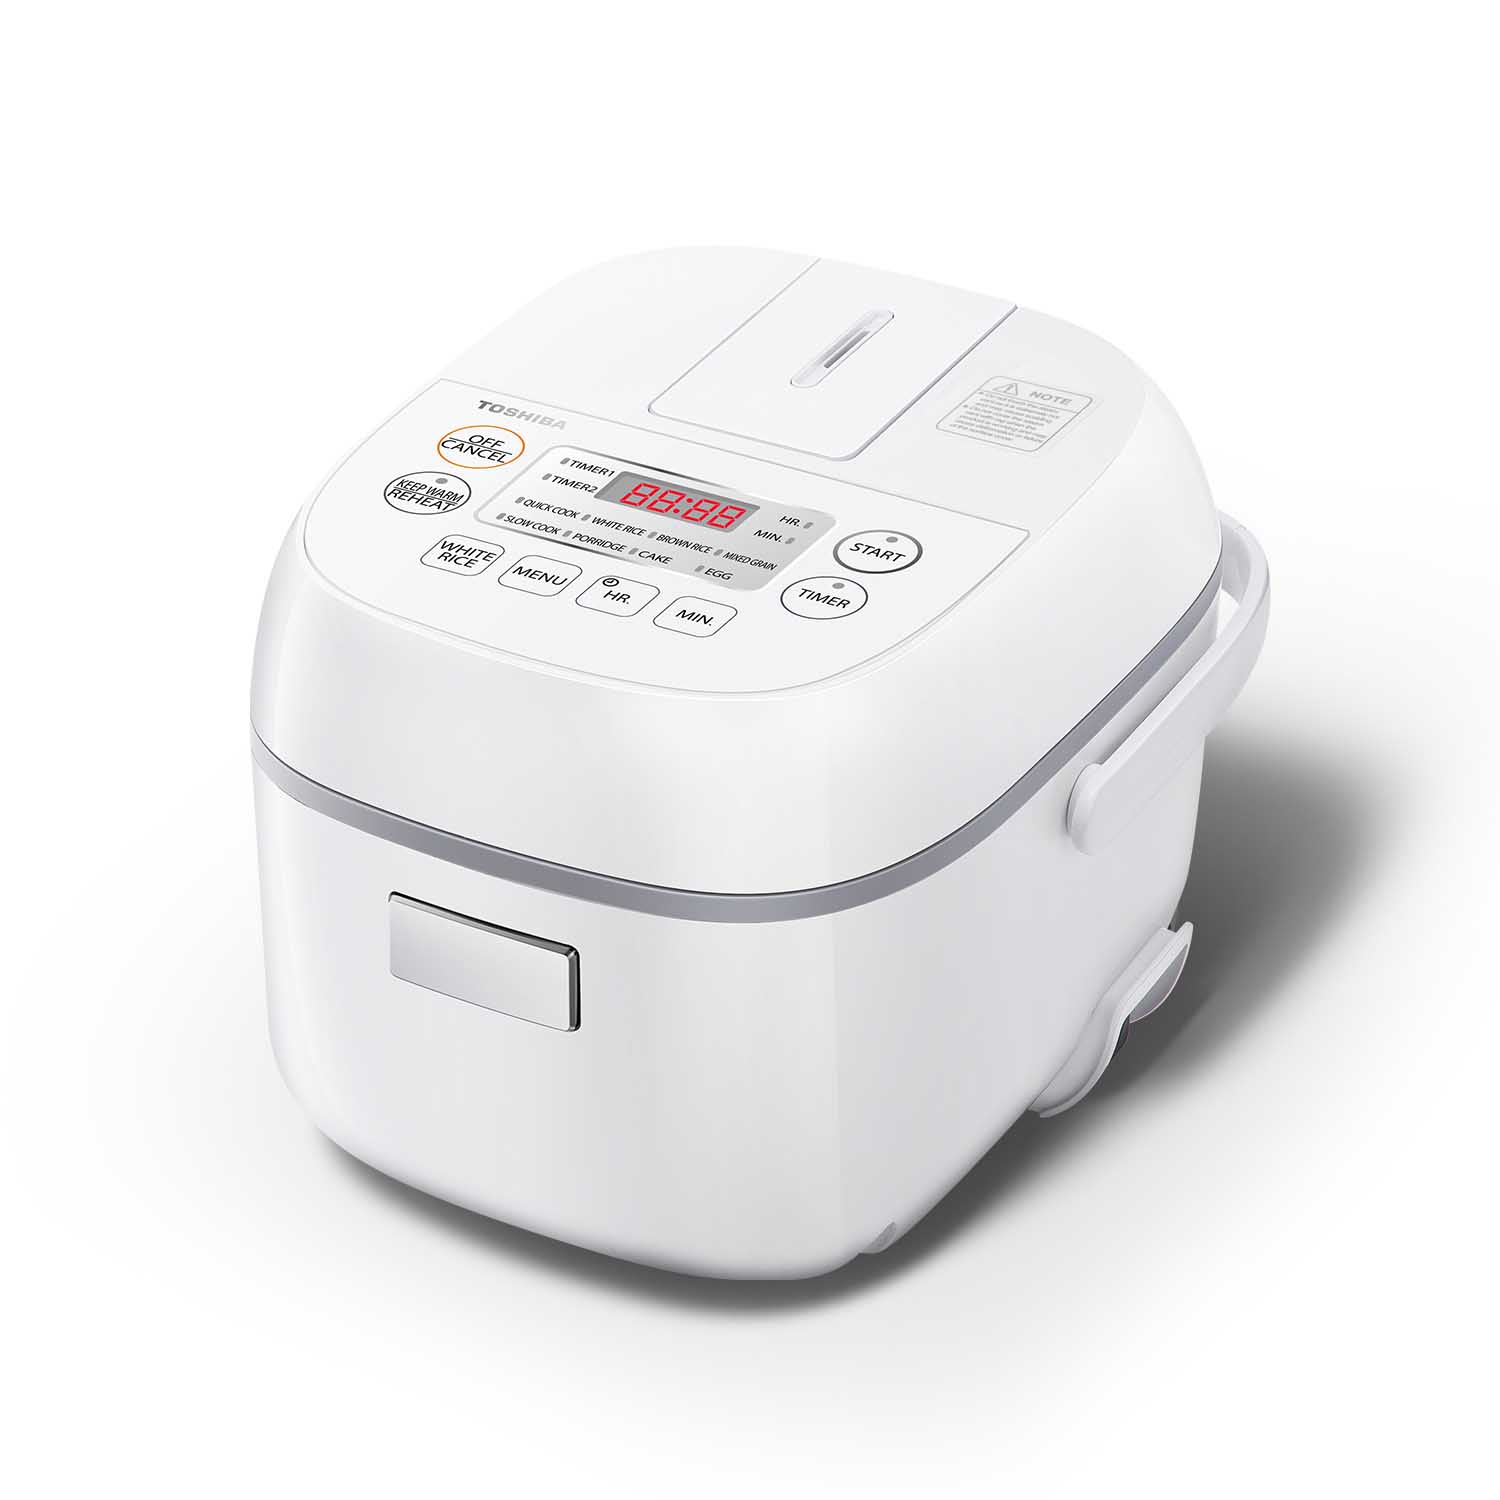 https://www.momjunction.com/wp-content/uploads/product-images/toshiba-one-touch-cooker_afl285.jpg